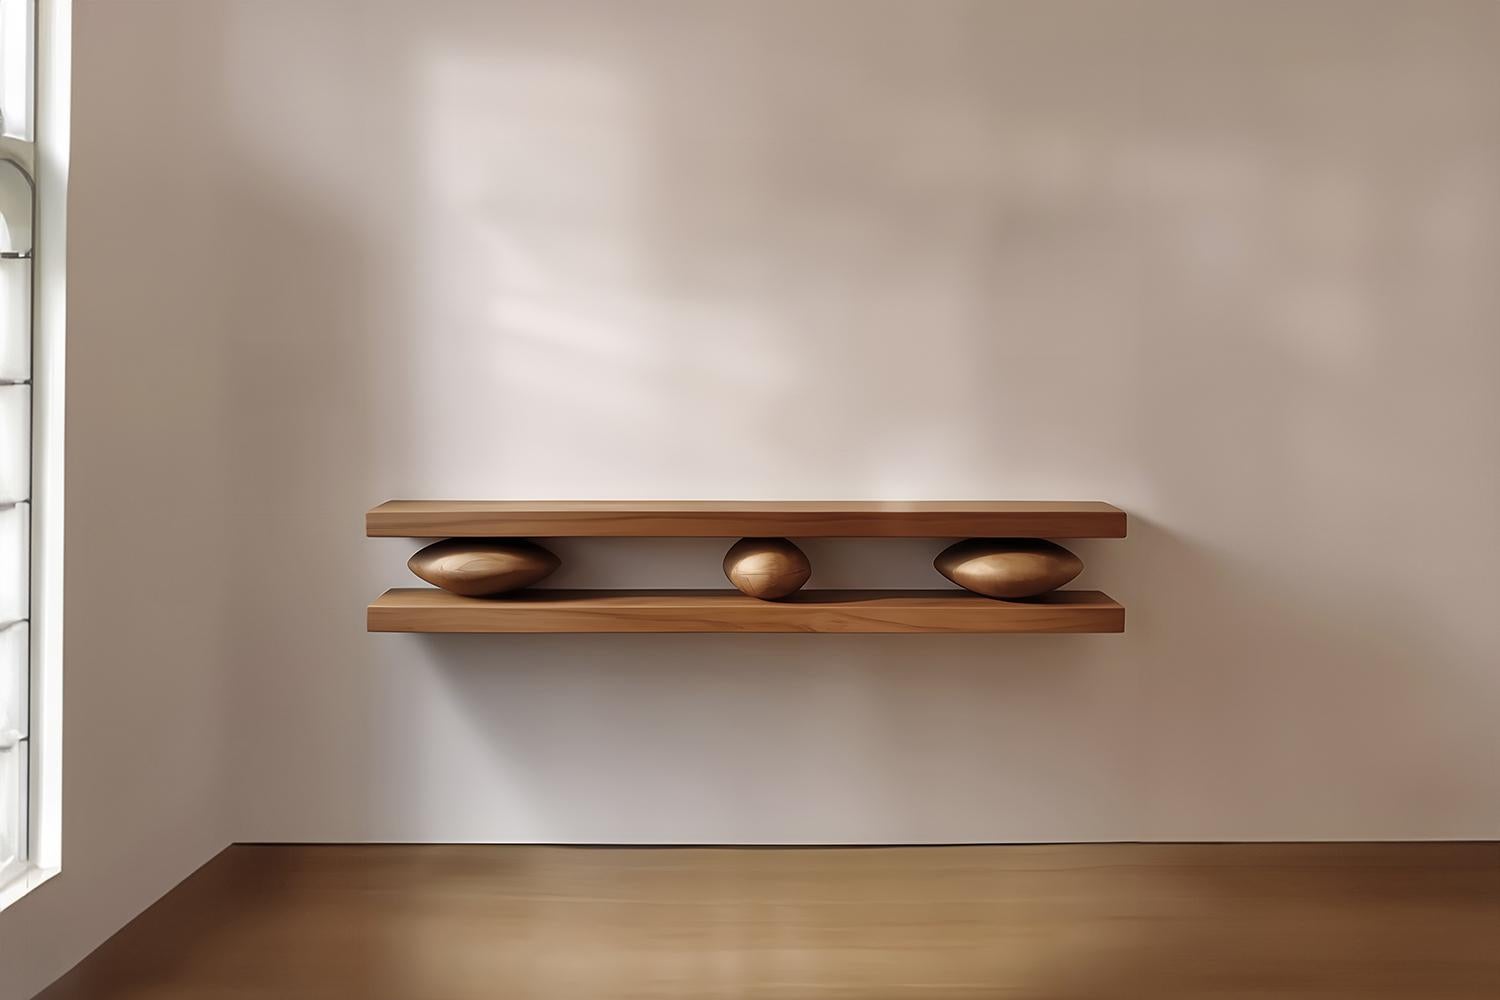 Set of Two Large Floating Shelves with Three Sculptural Wooden Pebble Accents in the Middle, Sereno by Joel Escalona

—

What happens when the practical becomes art?
What happens when ornamentation gains significance?

Those were the questions Joel